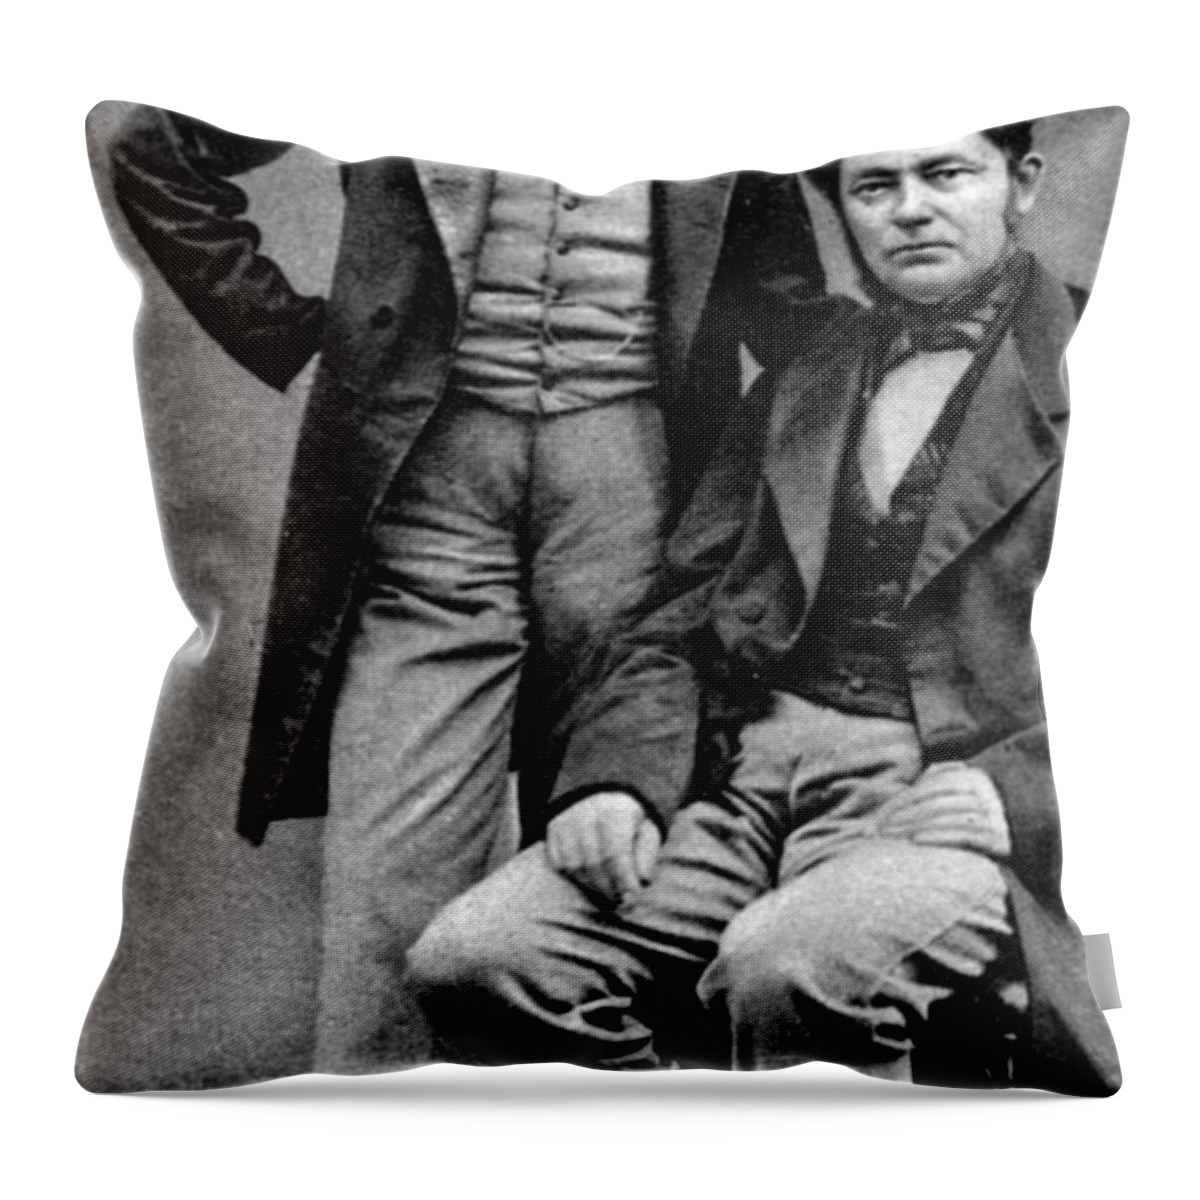 Science Throw Pillow featuring the photograph Gustav Kirchhoff And Robert Bunsen by Science Source